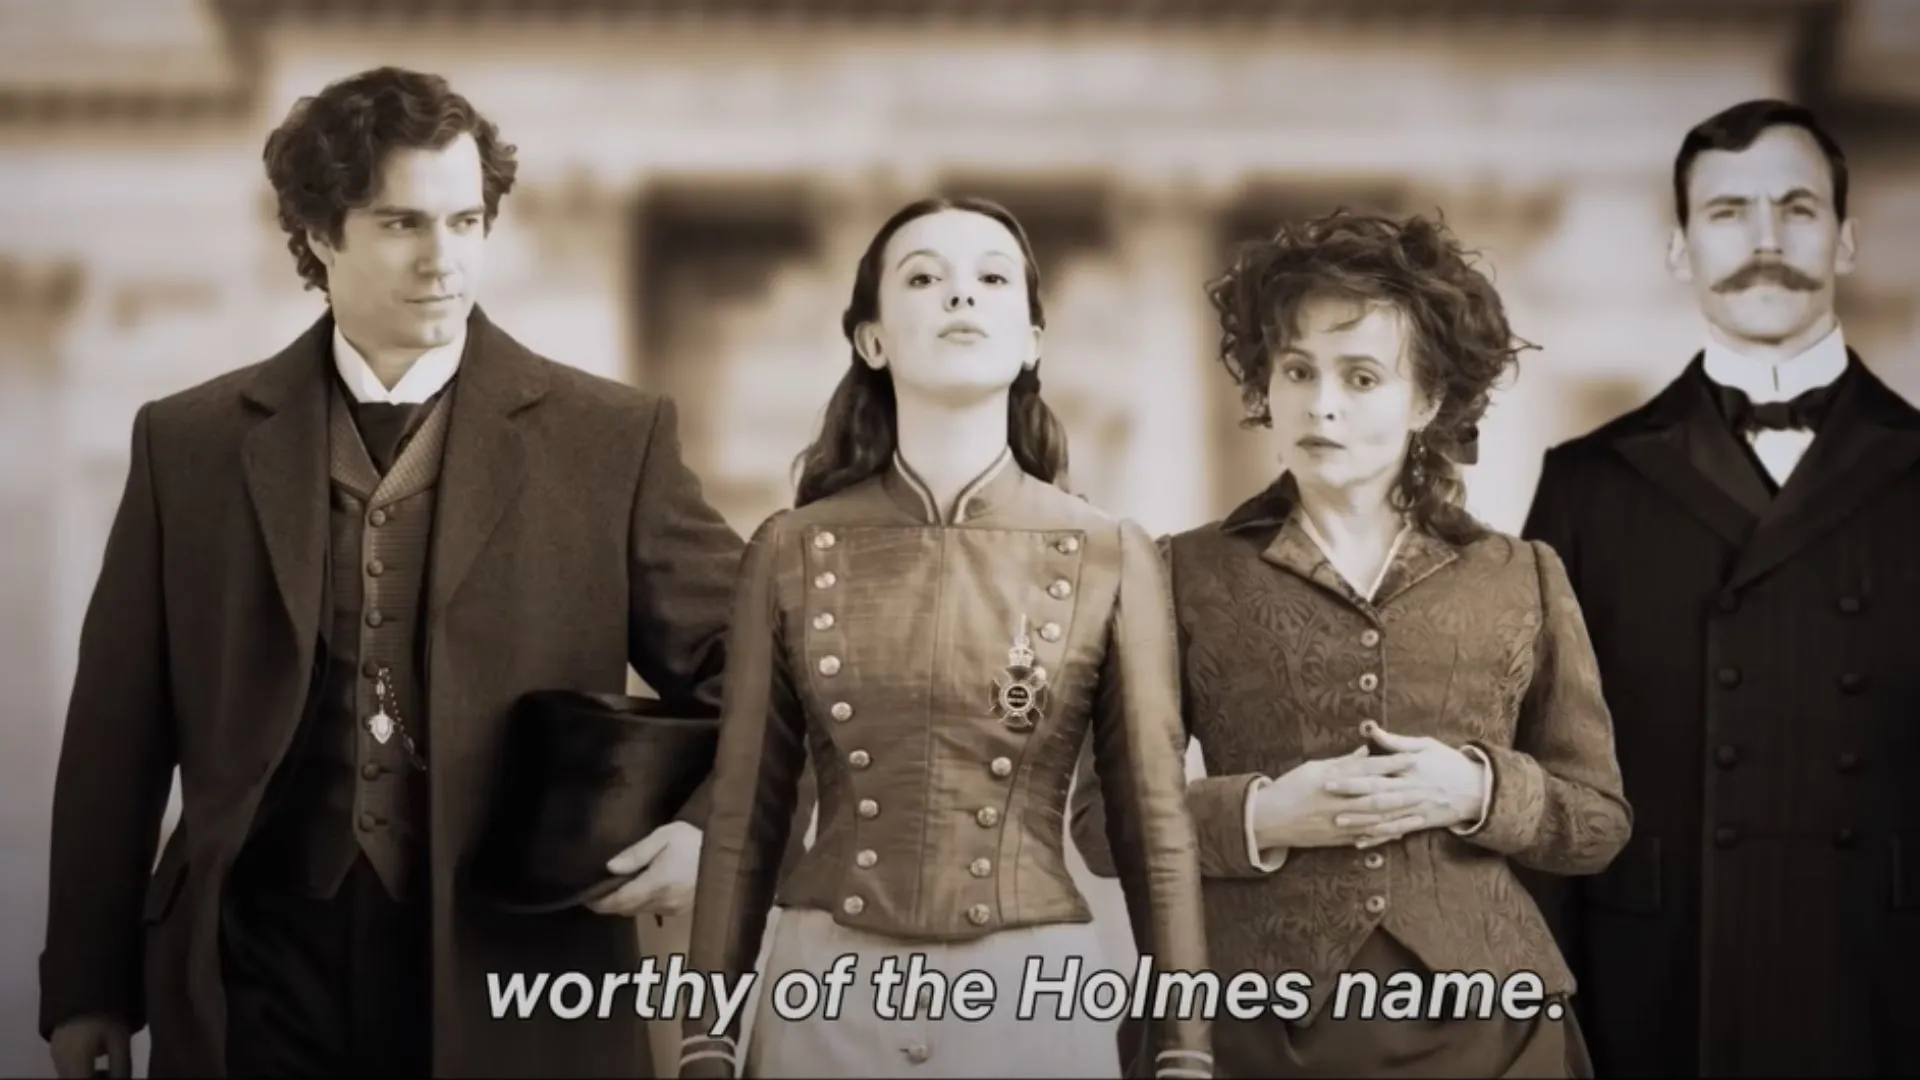 Enola Holmes 2 Trailer shows Millie Bobby Brown & Henry Cavill Are Back